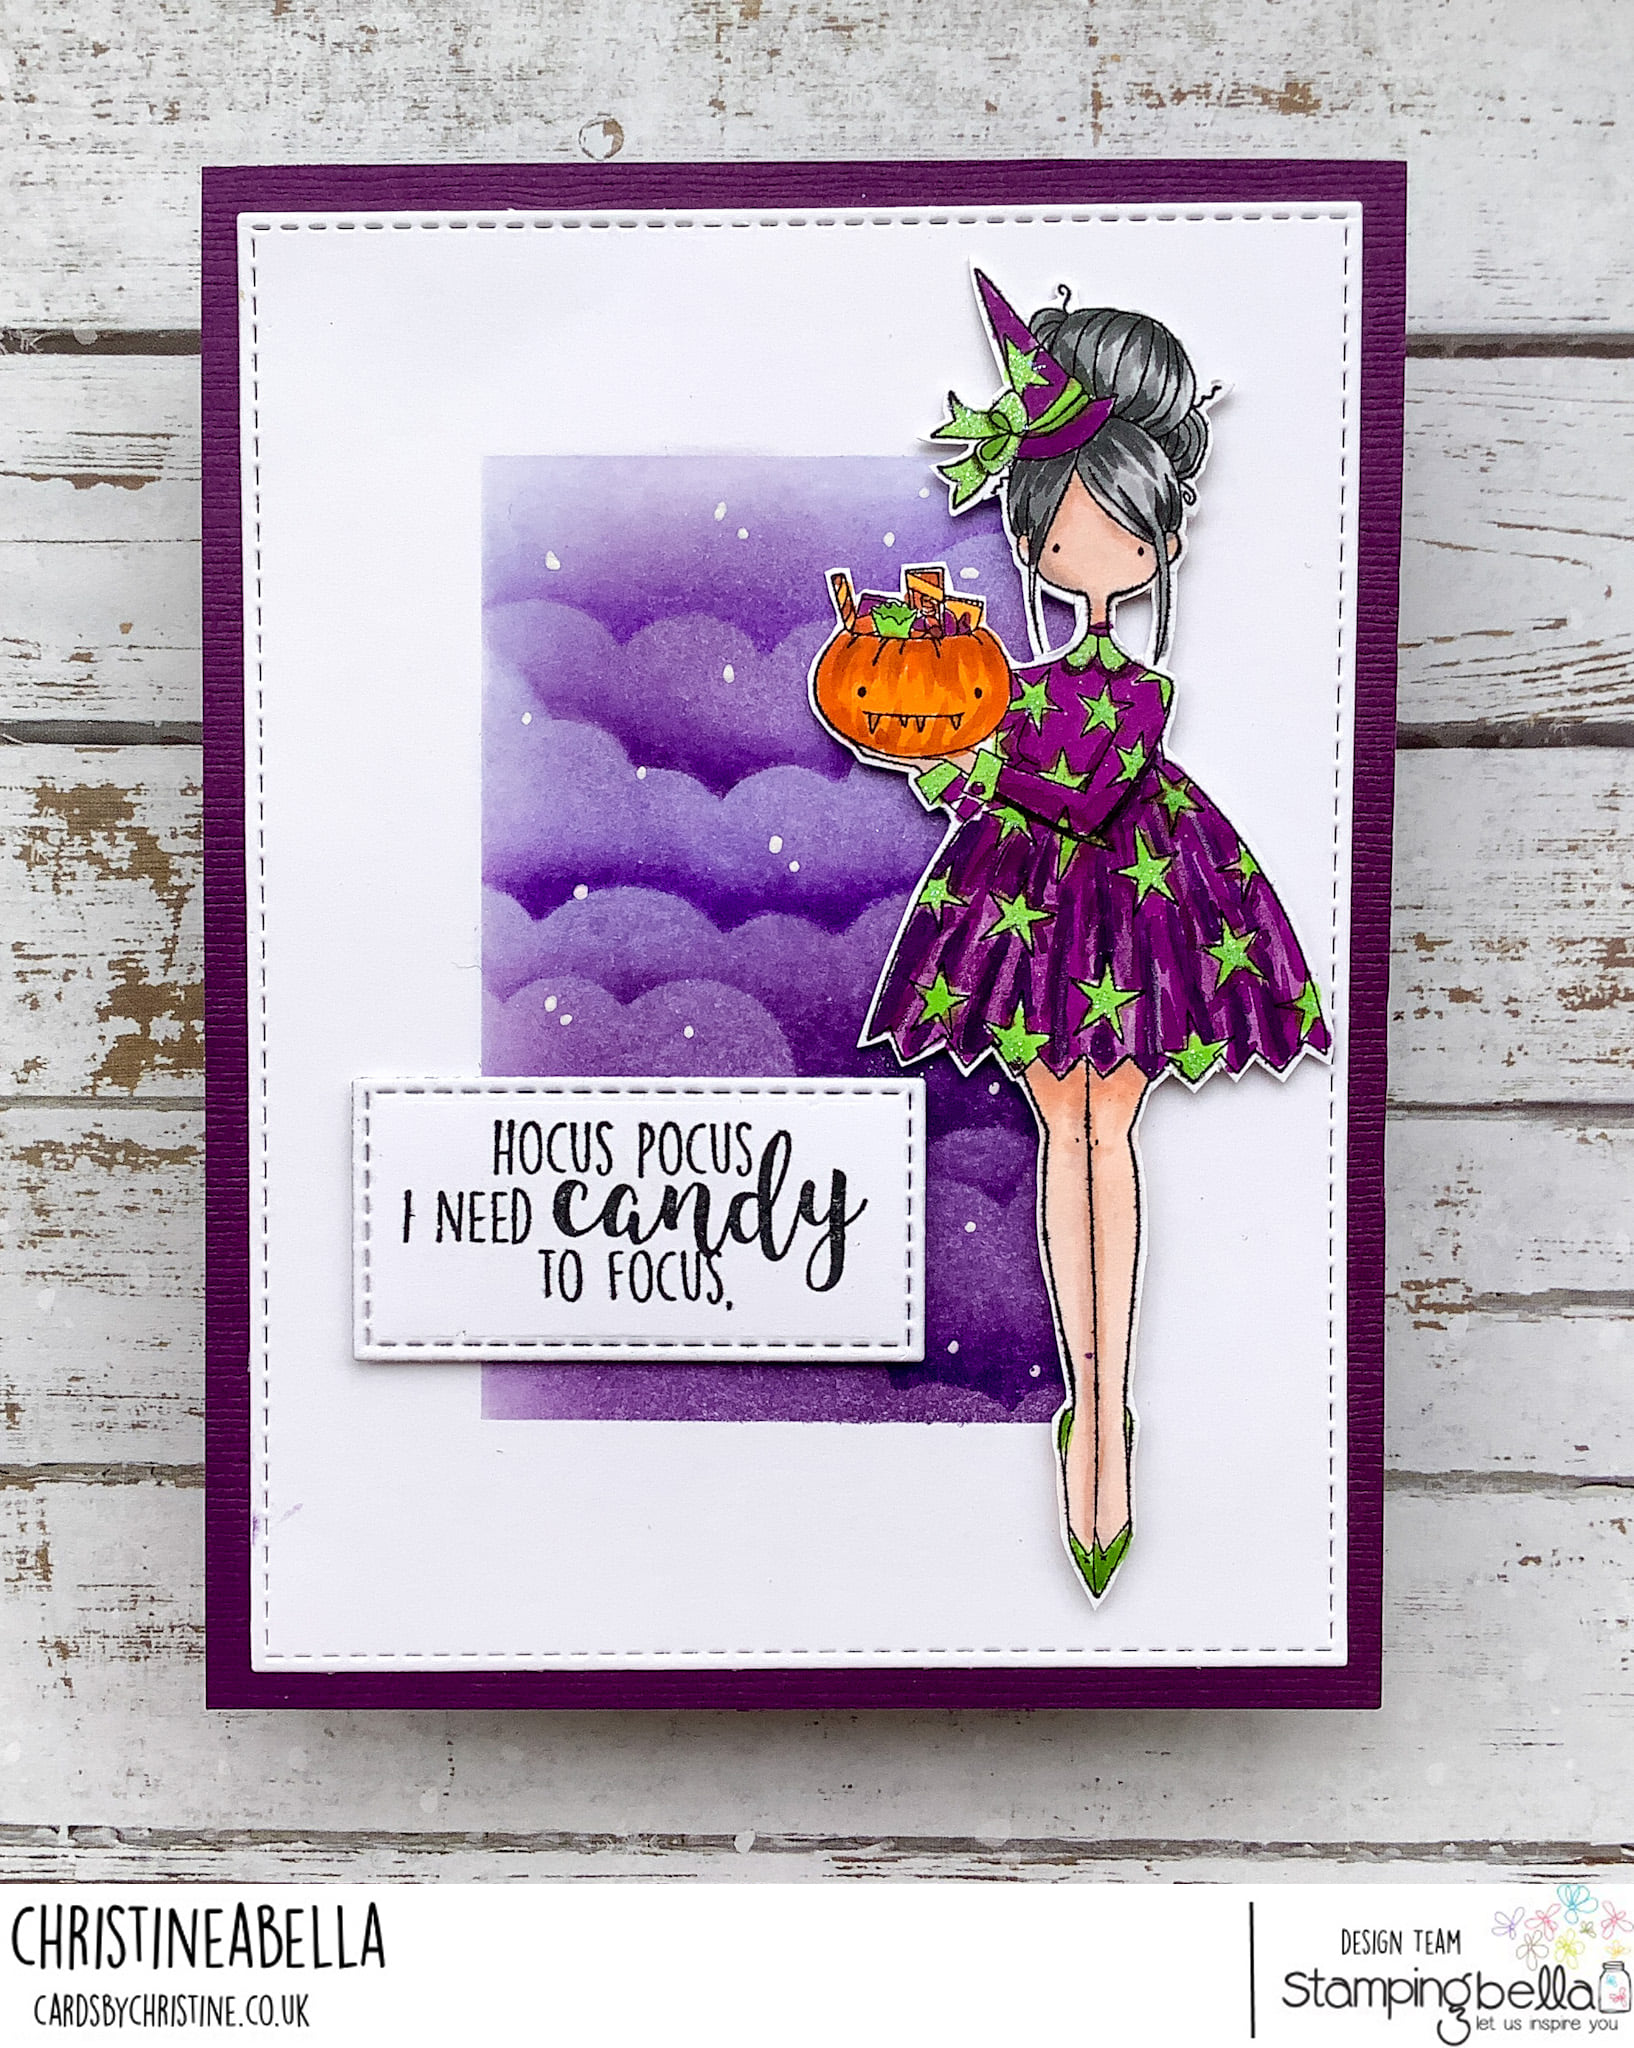 www.stampingbella.com: Rubber stamp used: CURVY GIRL LOVES HALLOWEEN. card by Christine Levison